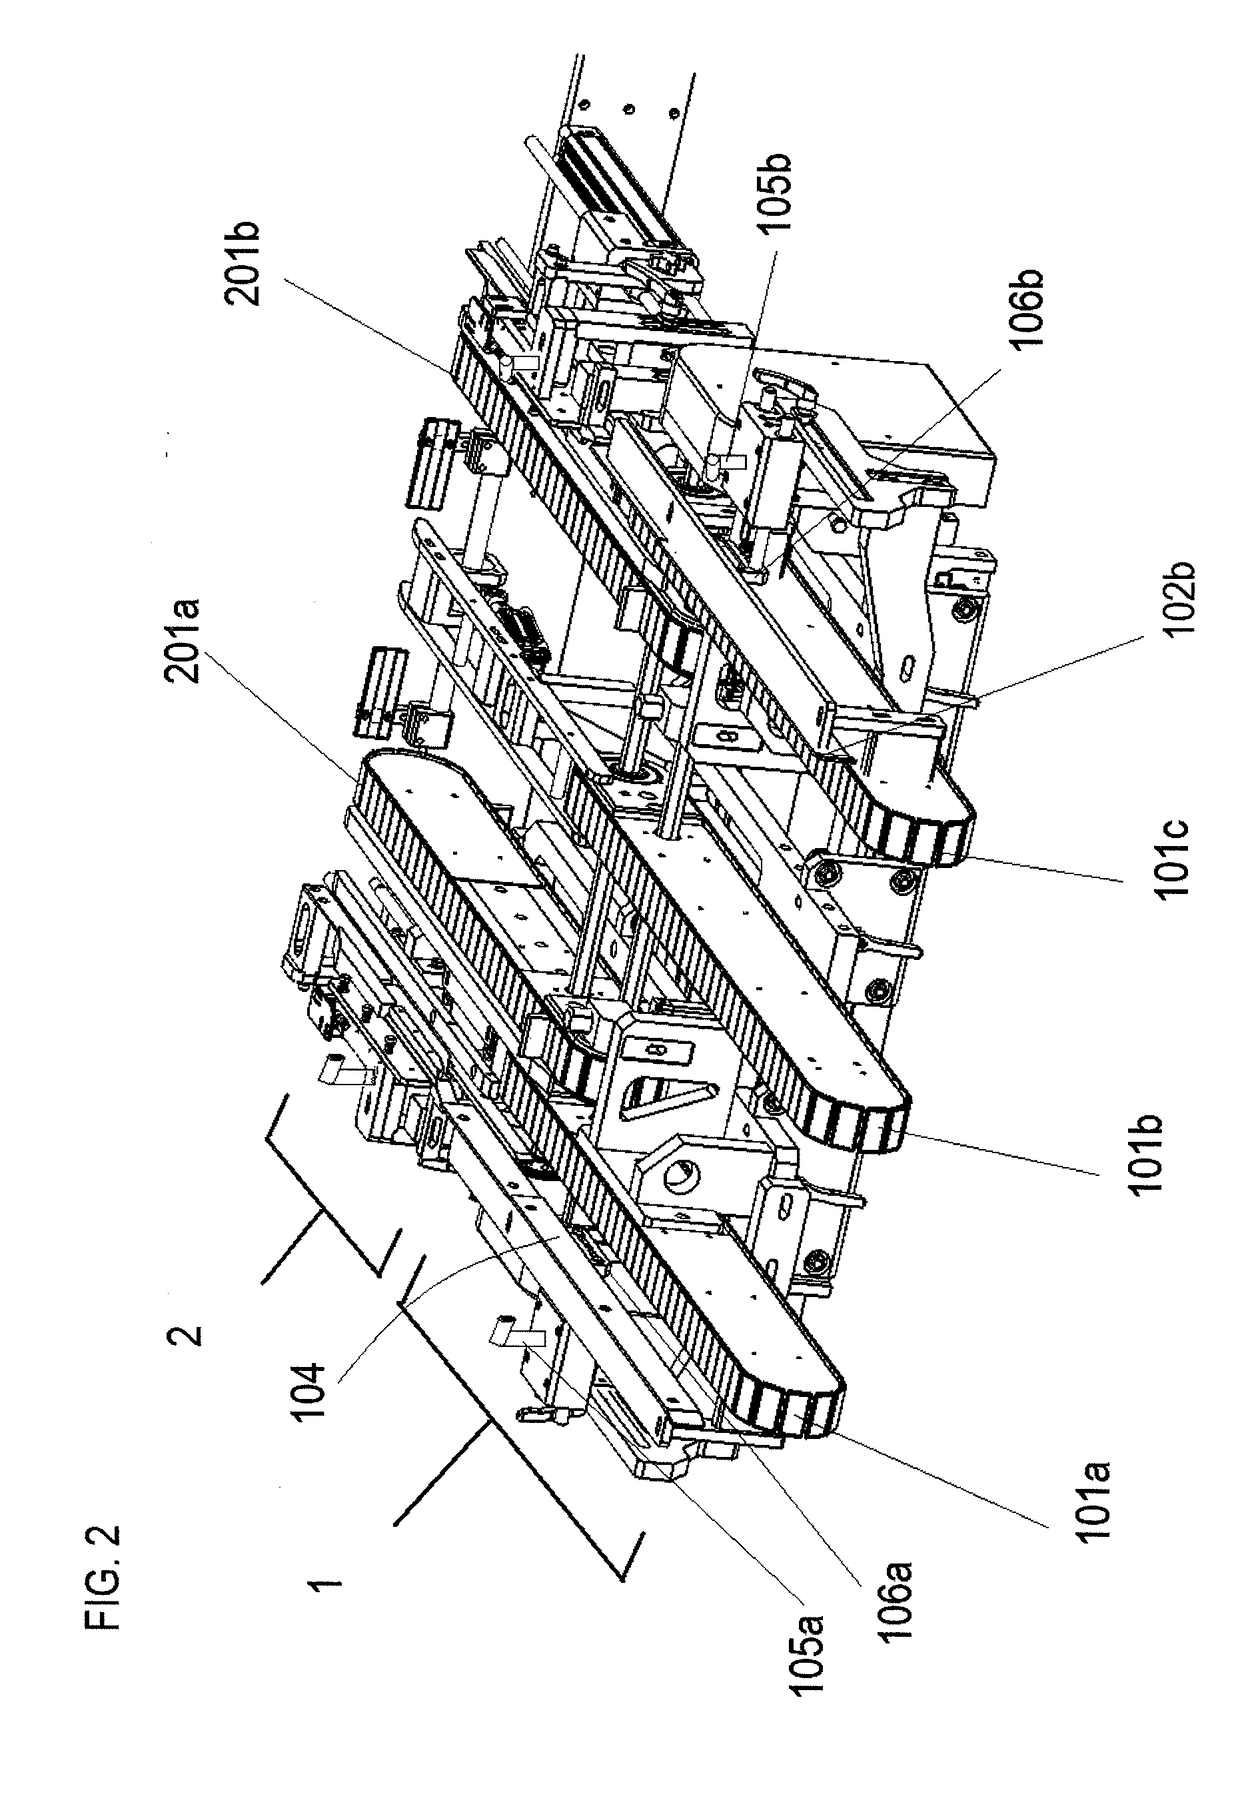 High speed automated feeding system and methods of using the same